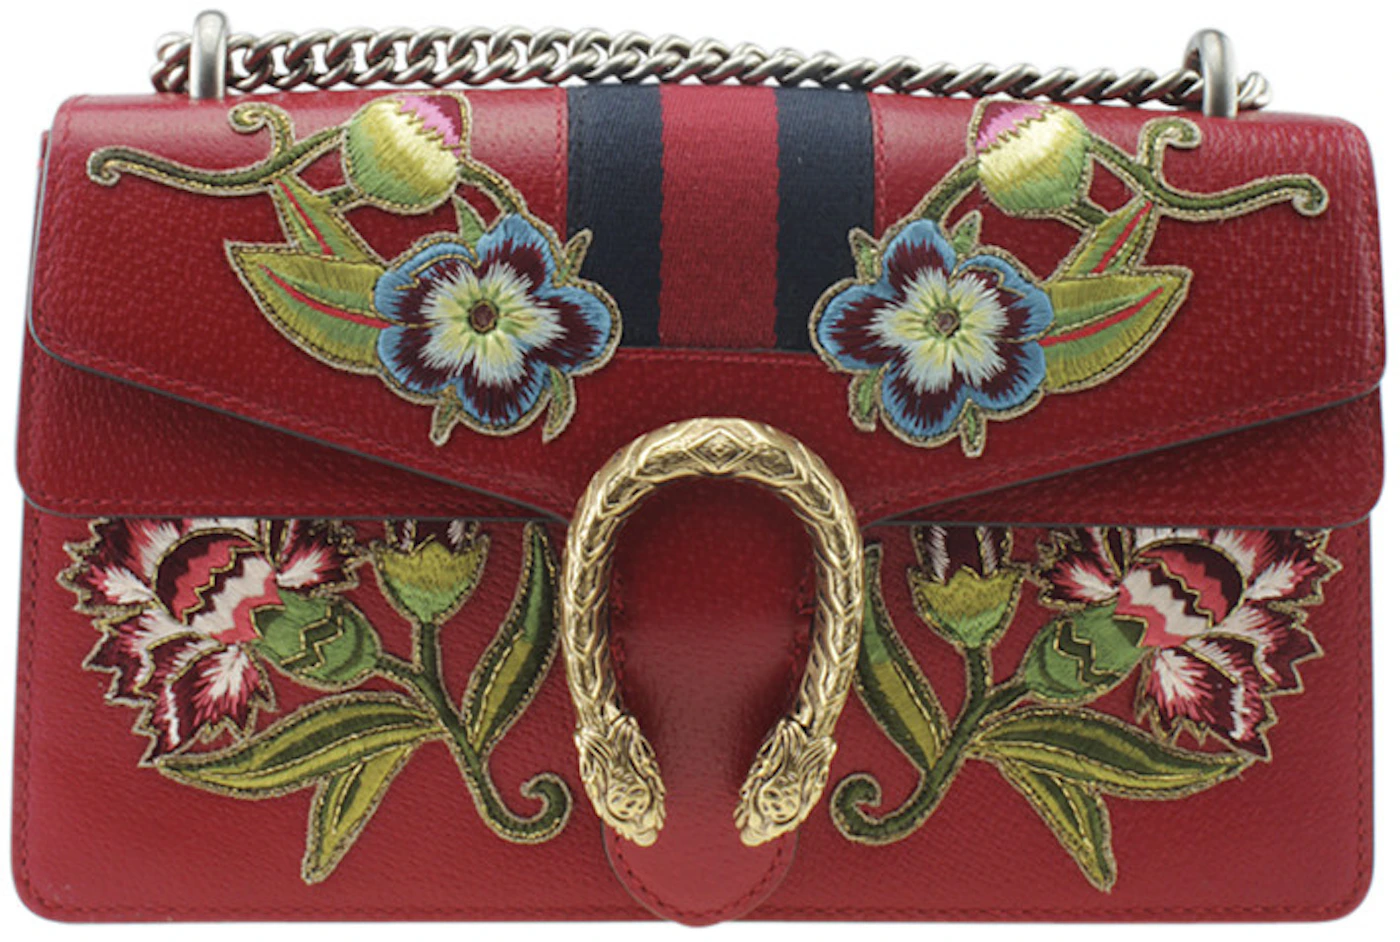 Gucci Dionysus Shoulder Bag Small Floral Embroidered Red in Leather ...